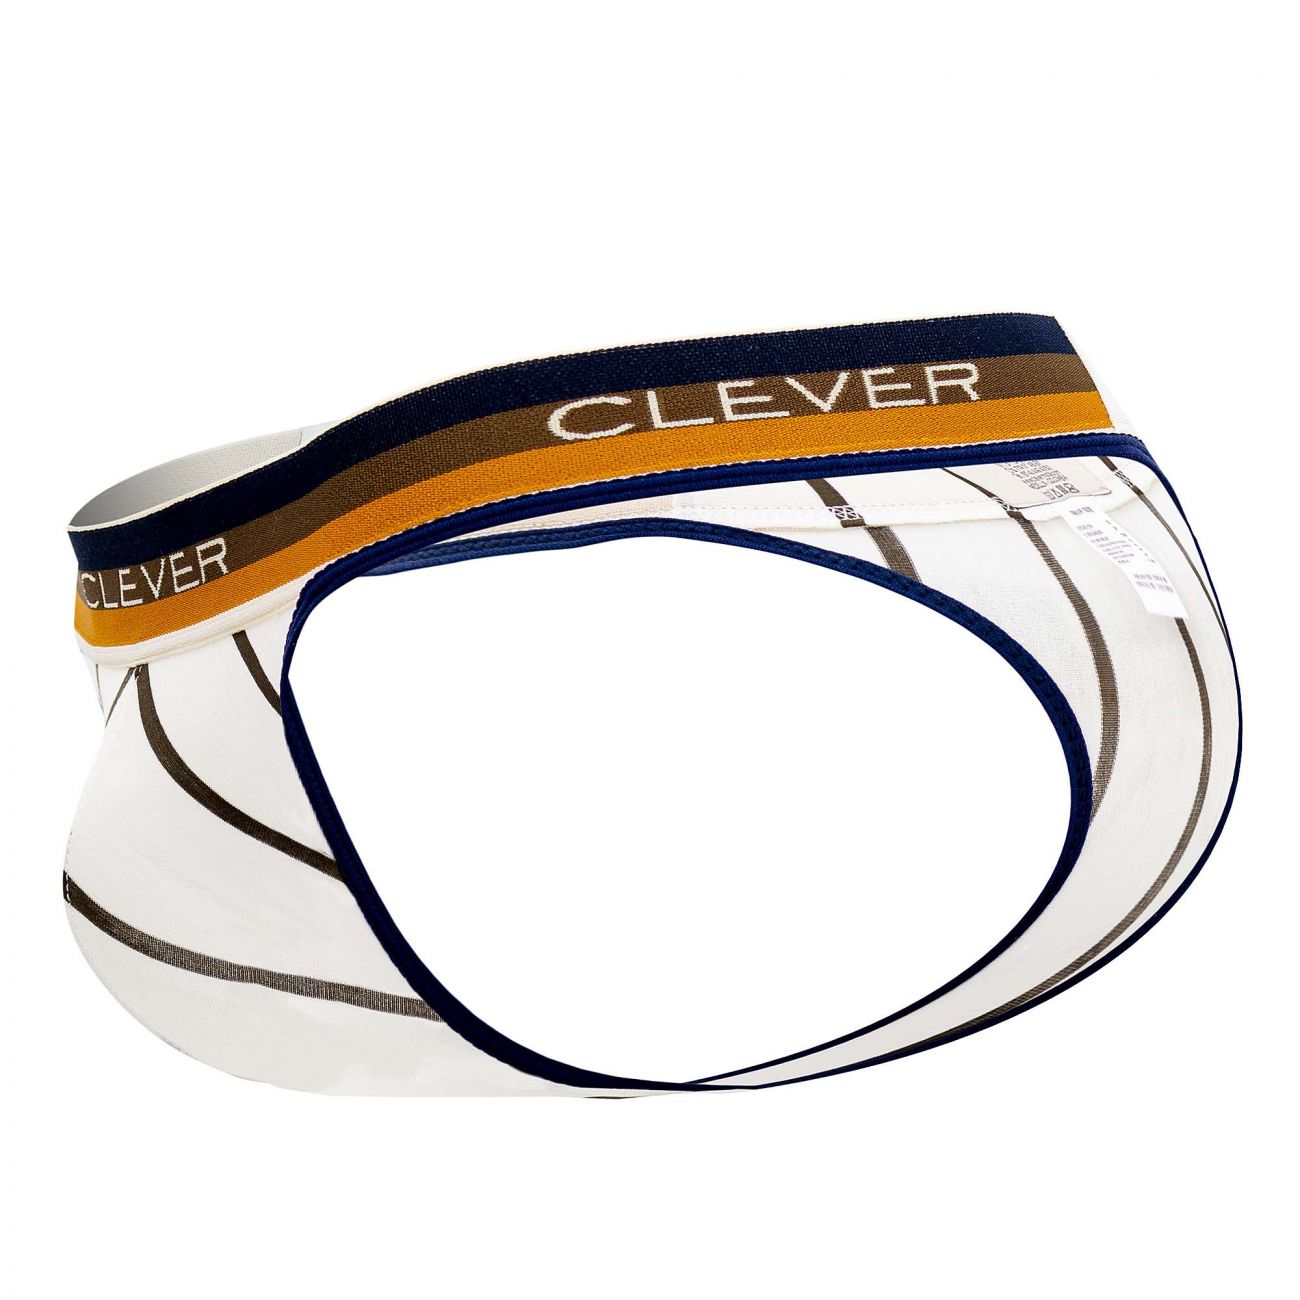 Clever 0584-1 Play Thongs